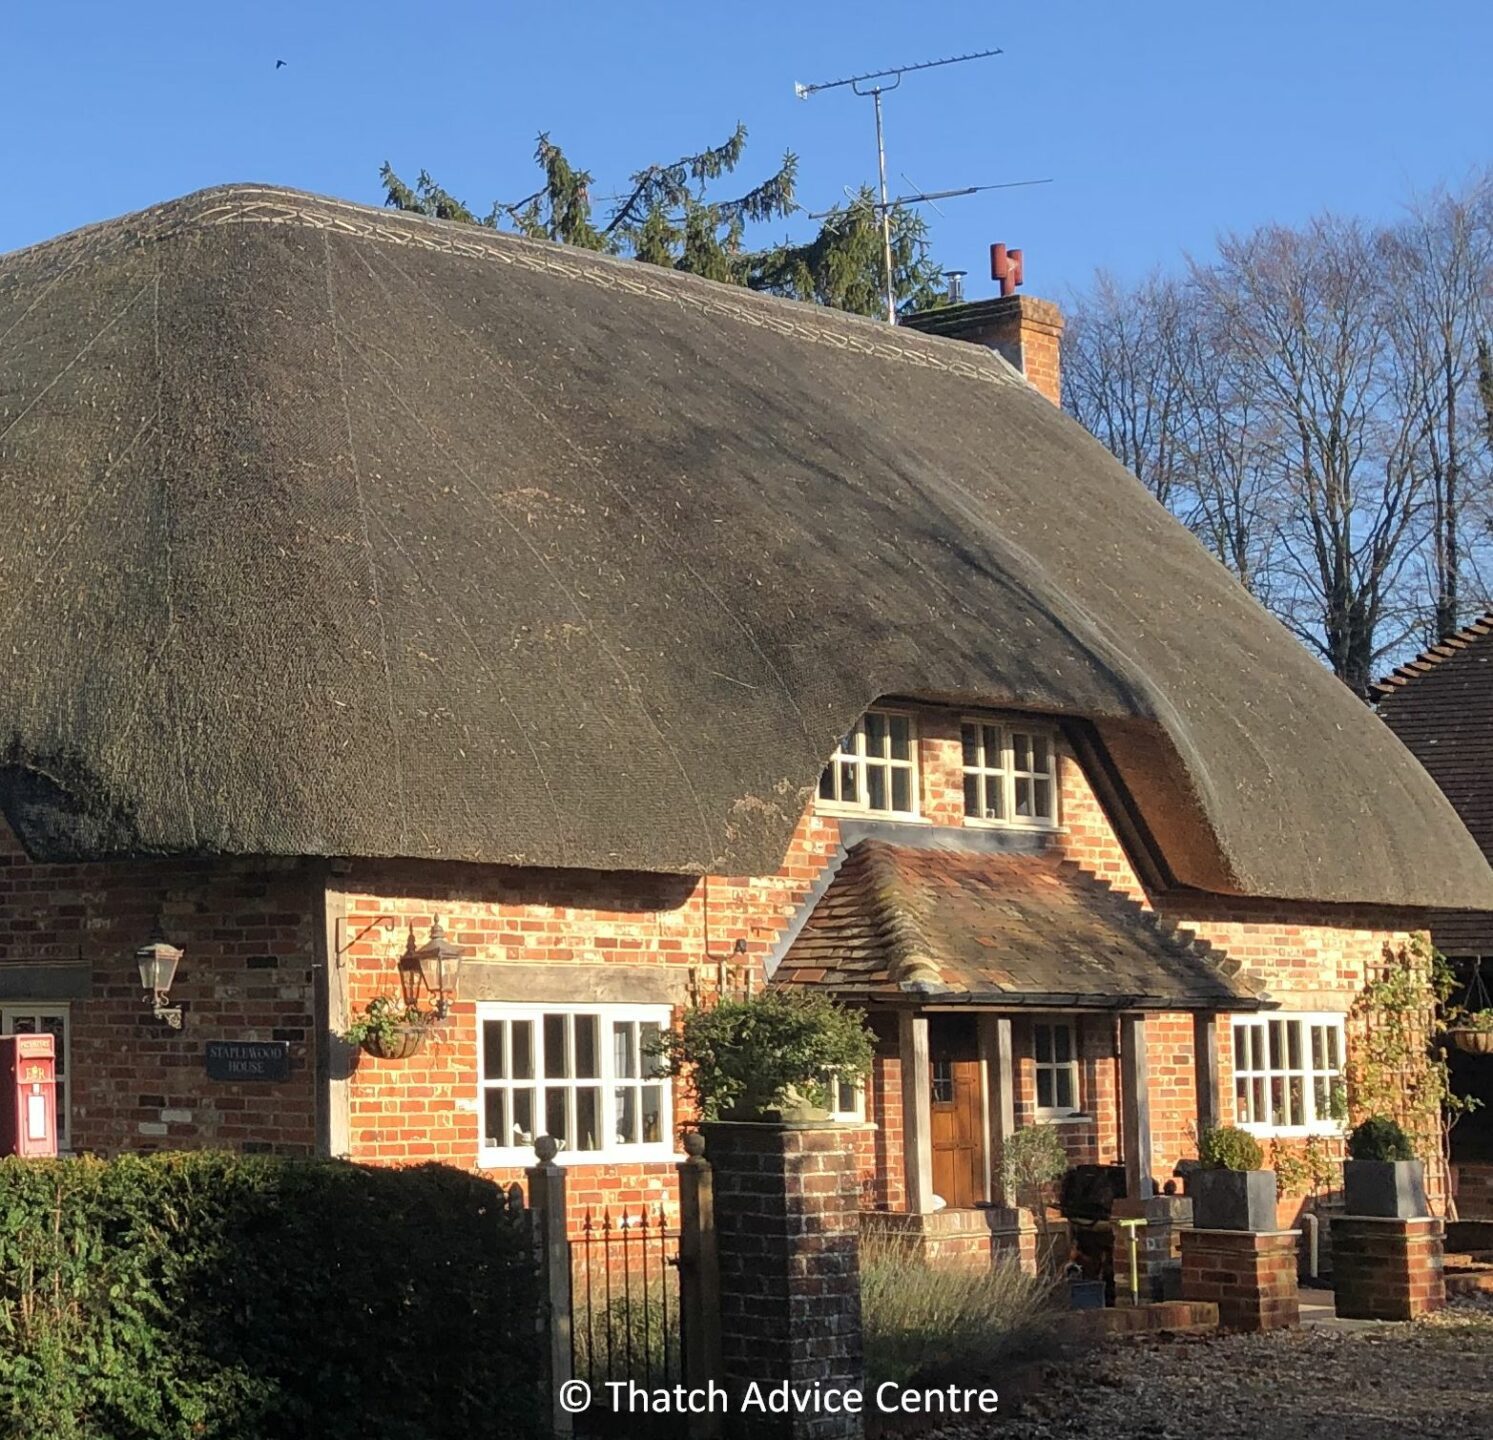 Thatch Advice Centre Newsletter March 23